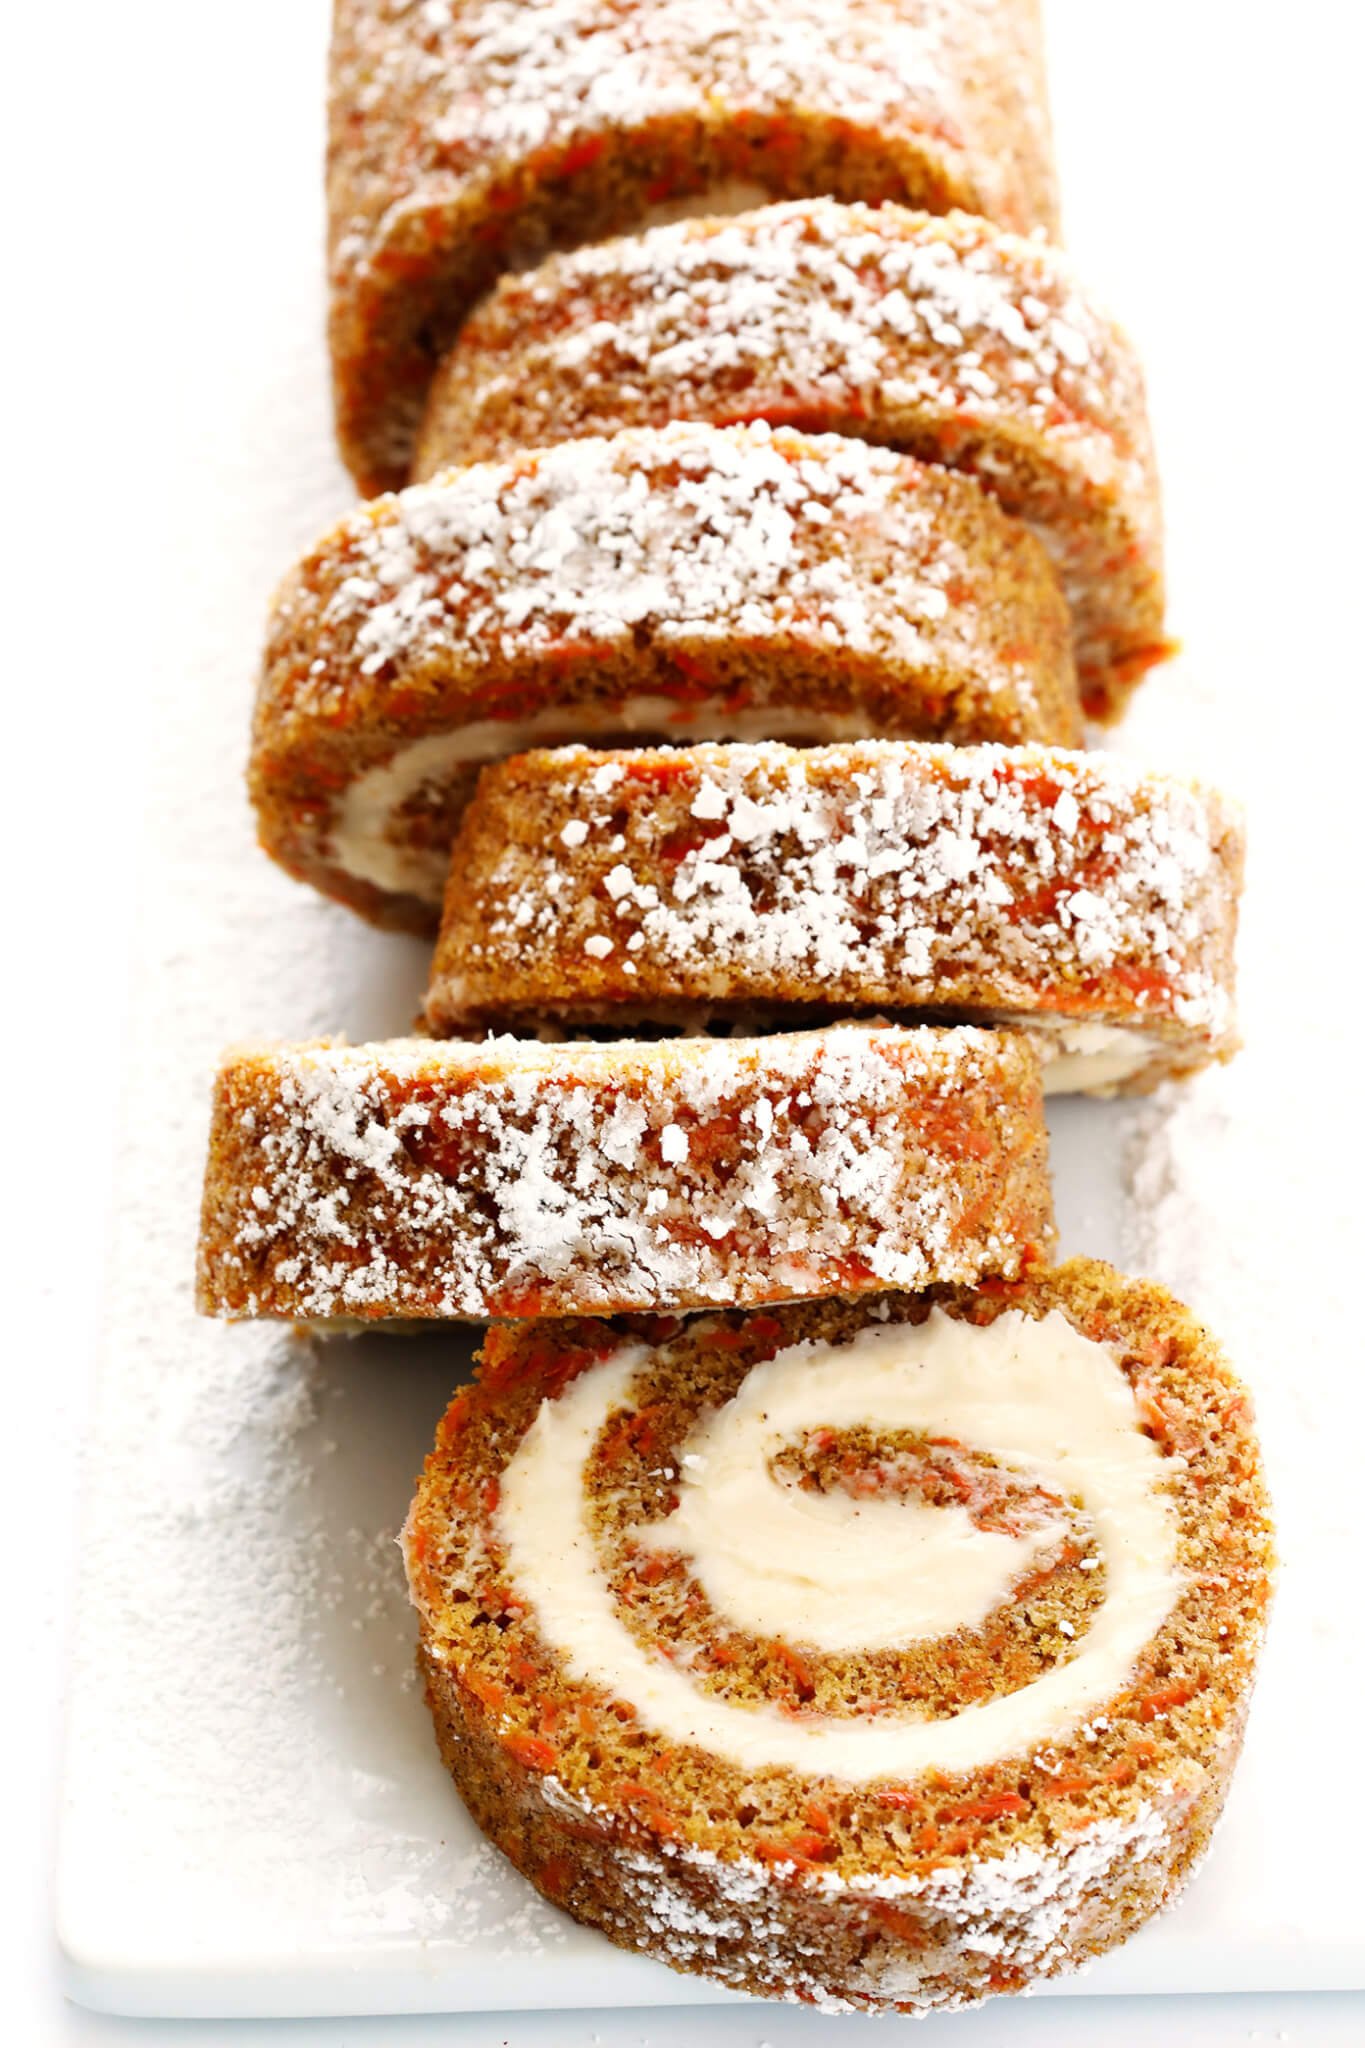 Everything you love about carrot cake...rolled up with cream cheese filling into this delicious Carrot Cake Roll! Such a fun dessert! | gimmesomeoven.com